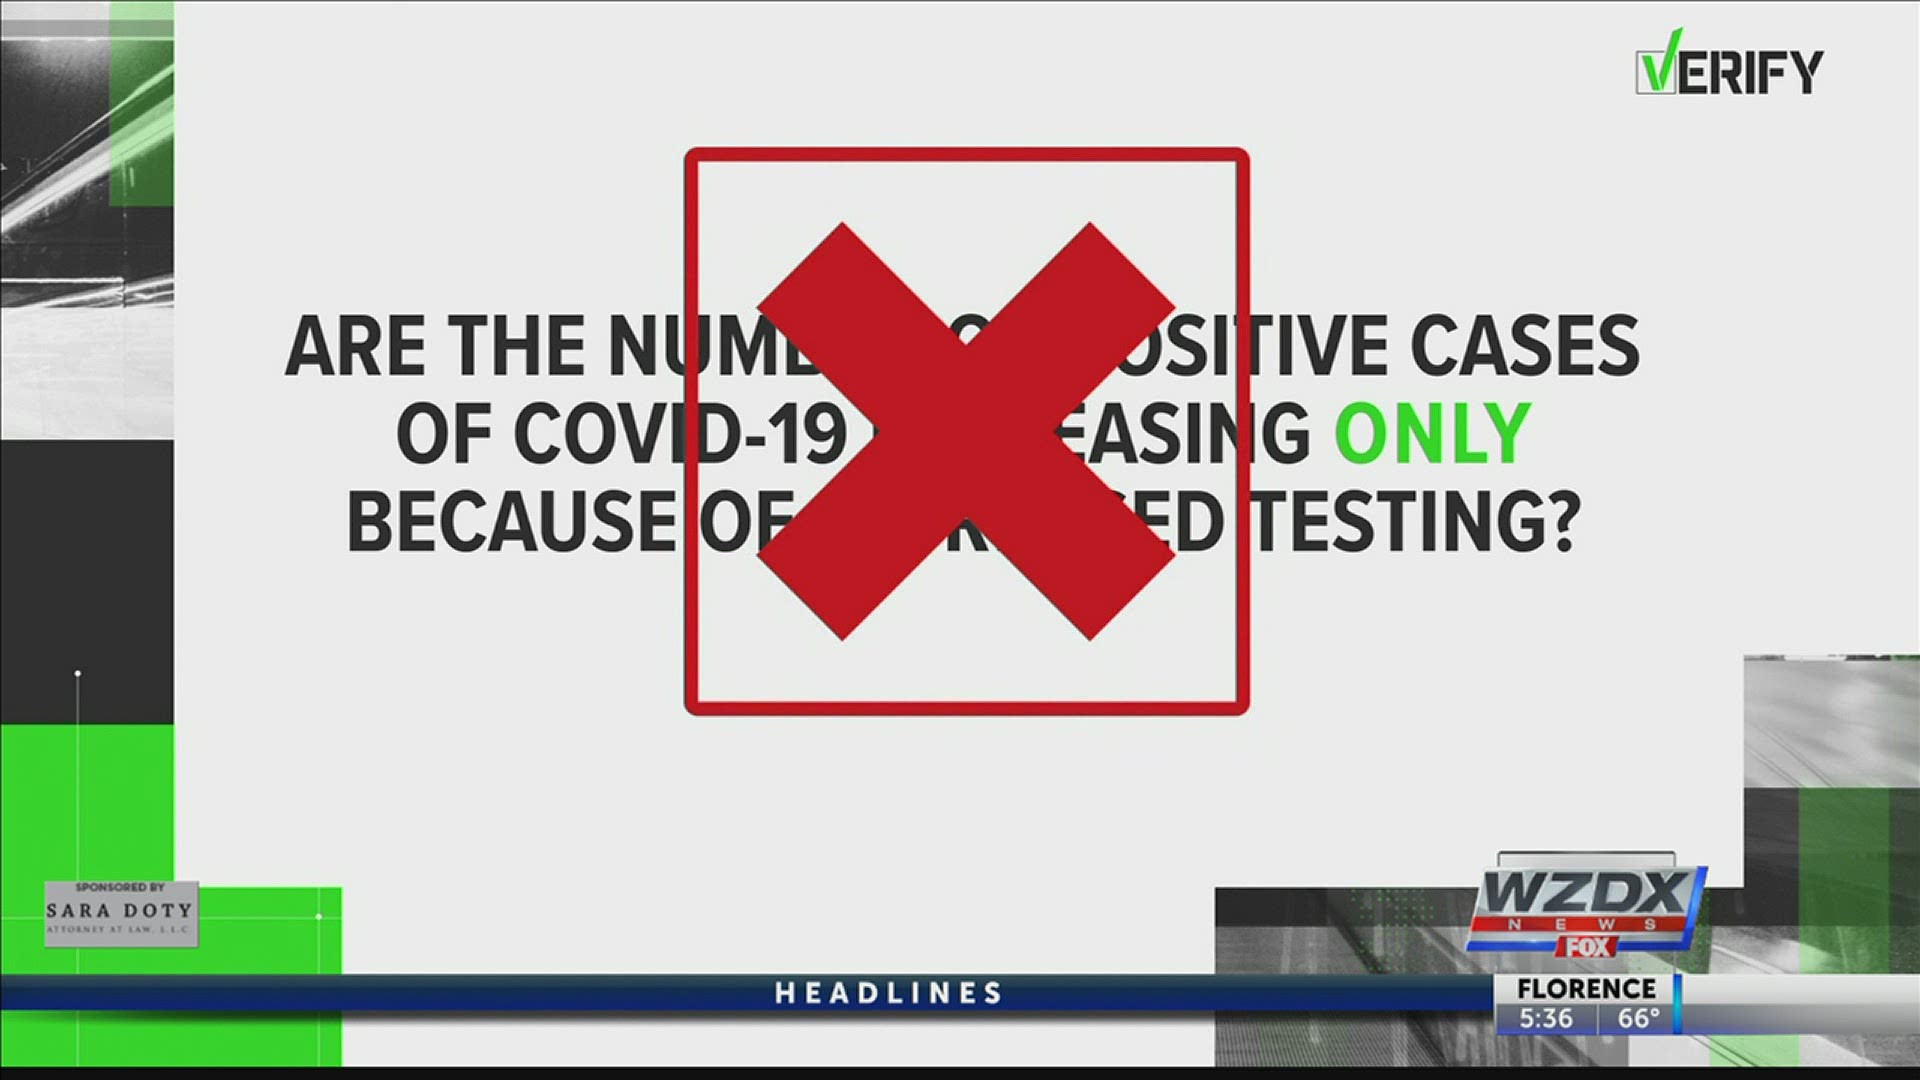 For months, this claim keeps popping up: COVID-19 cases are going up only because testing is going up. This is misleading.